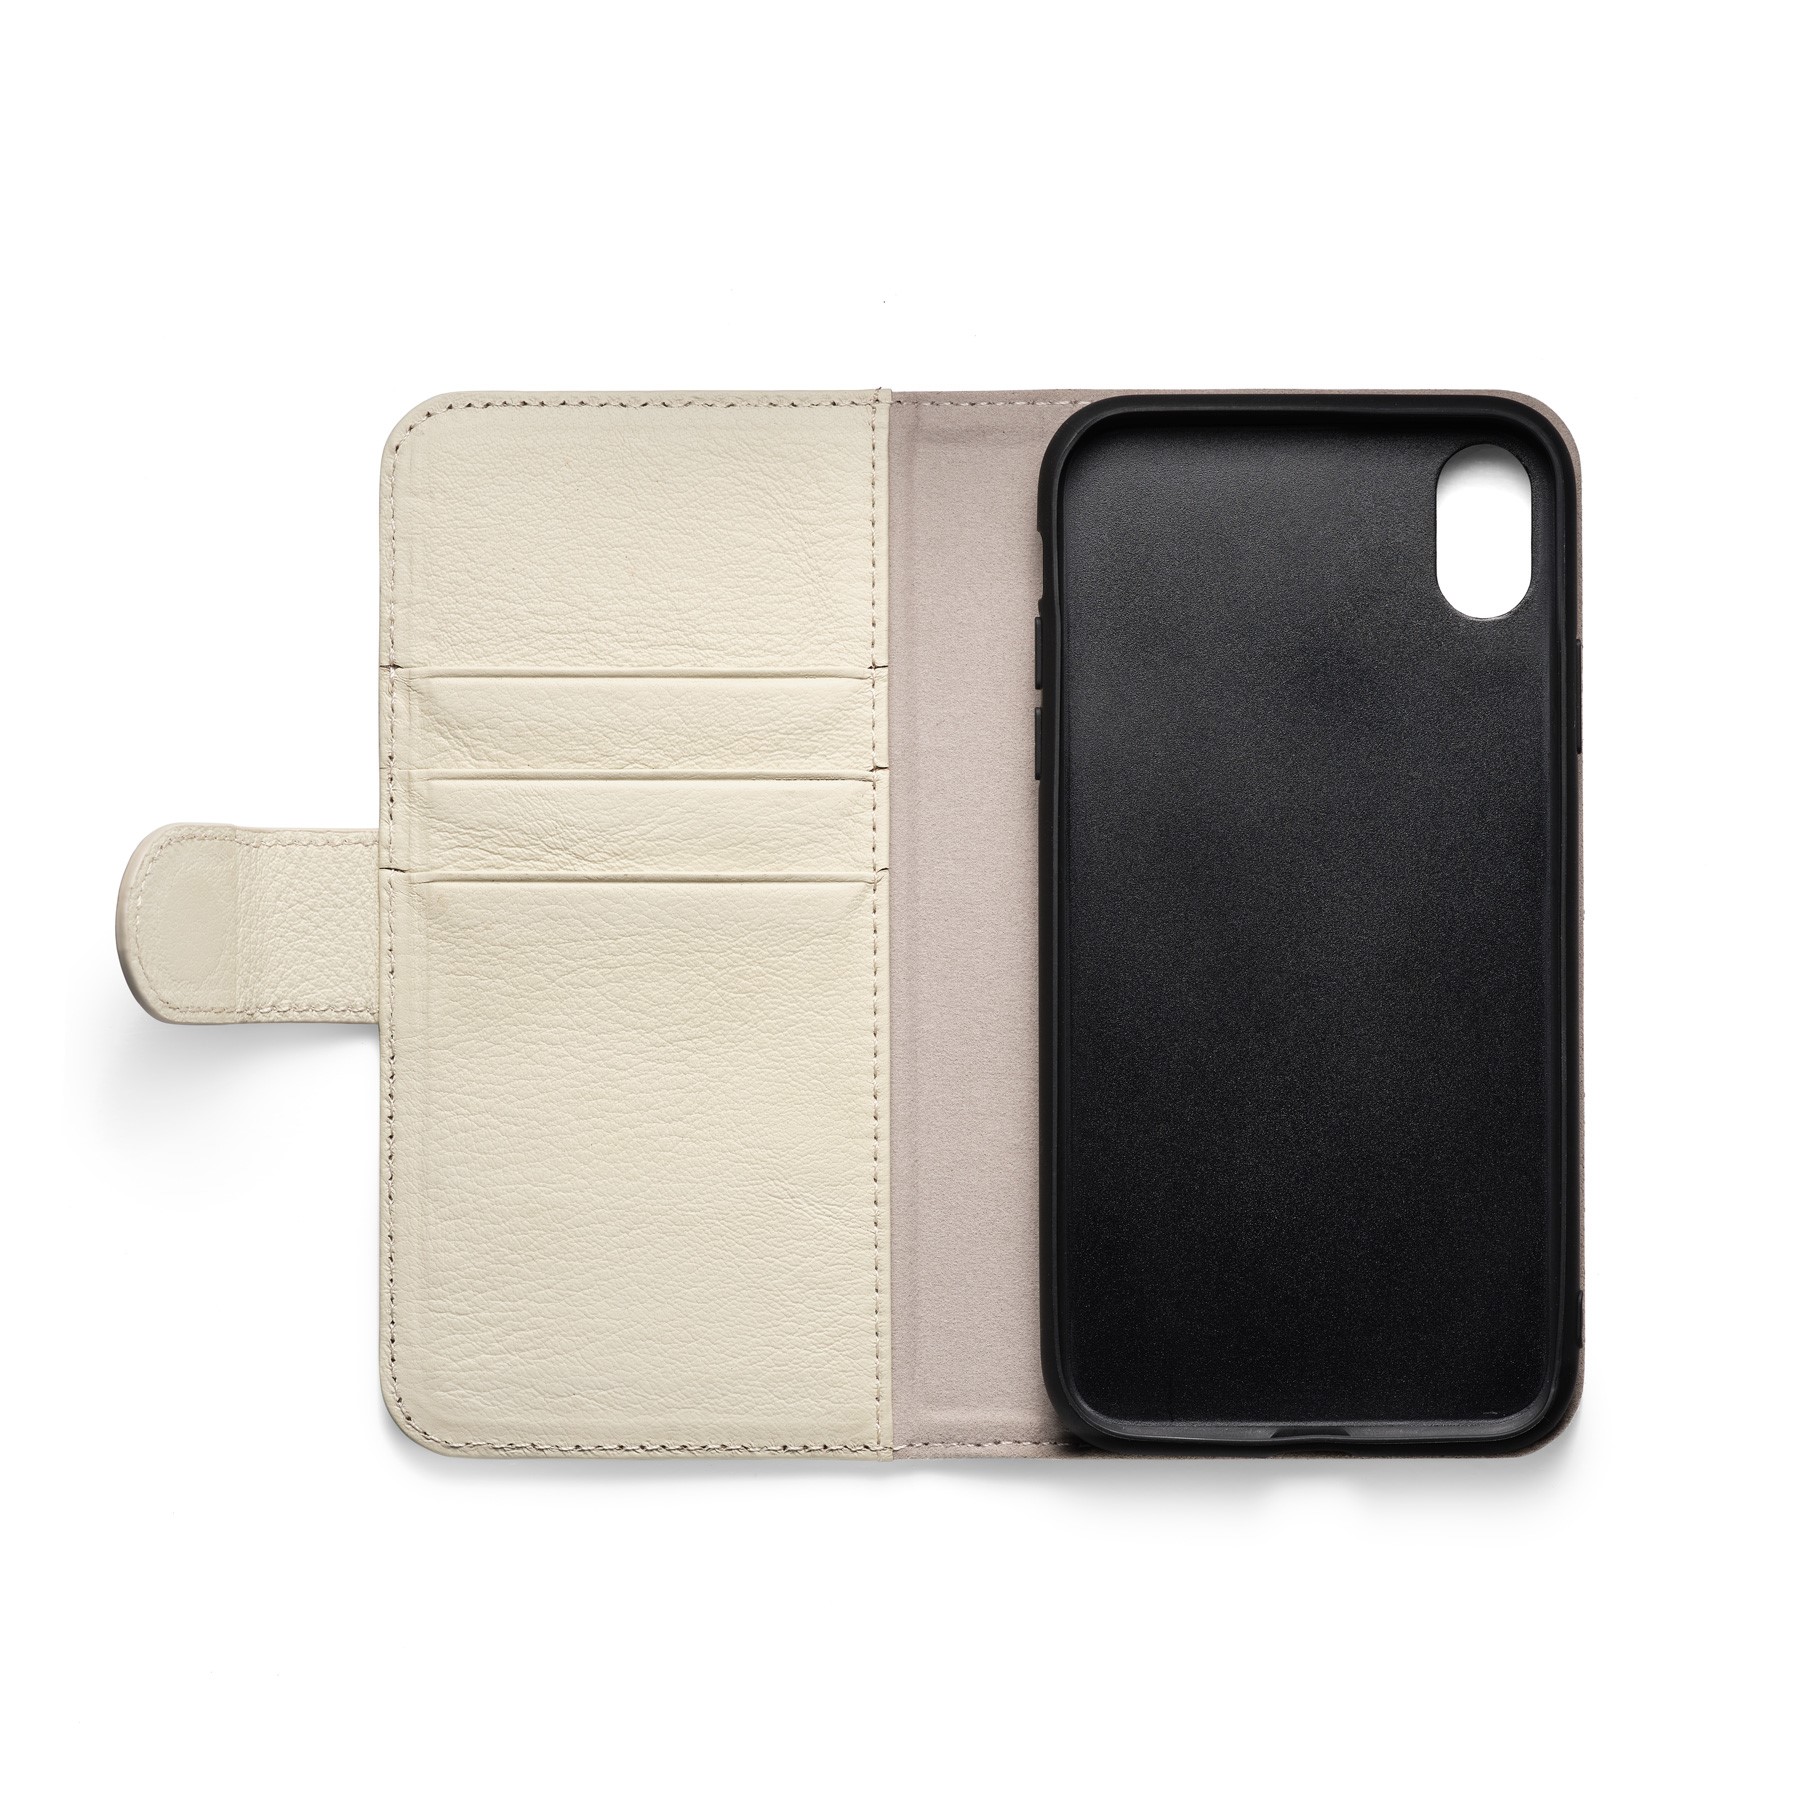 forgiven Degree Celsius hard working Volvo Car Lifestyle Collection Shop. Reimagined Flip iPhone Case XR